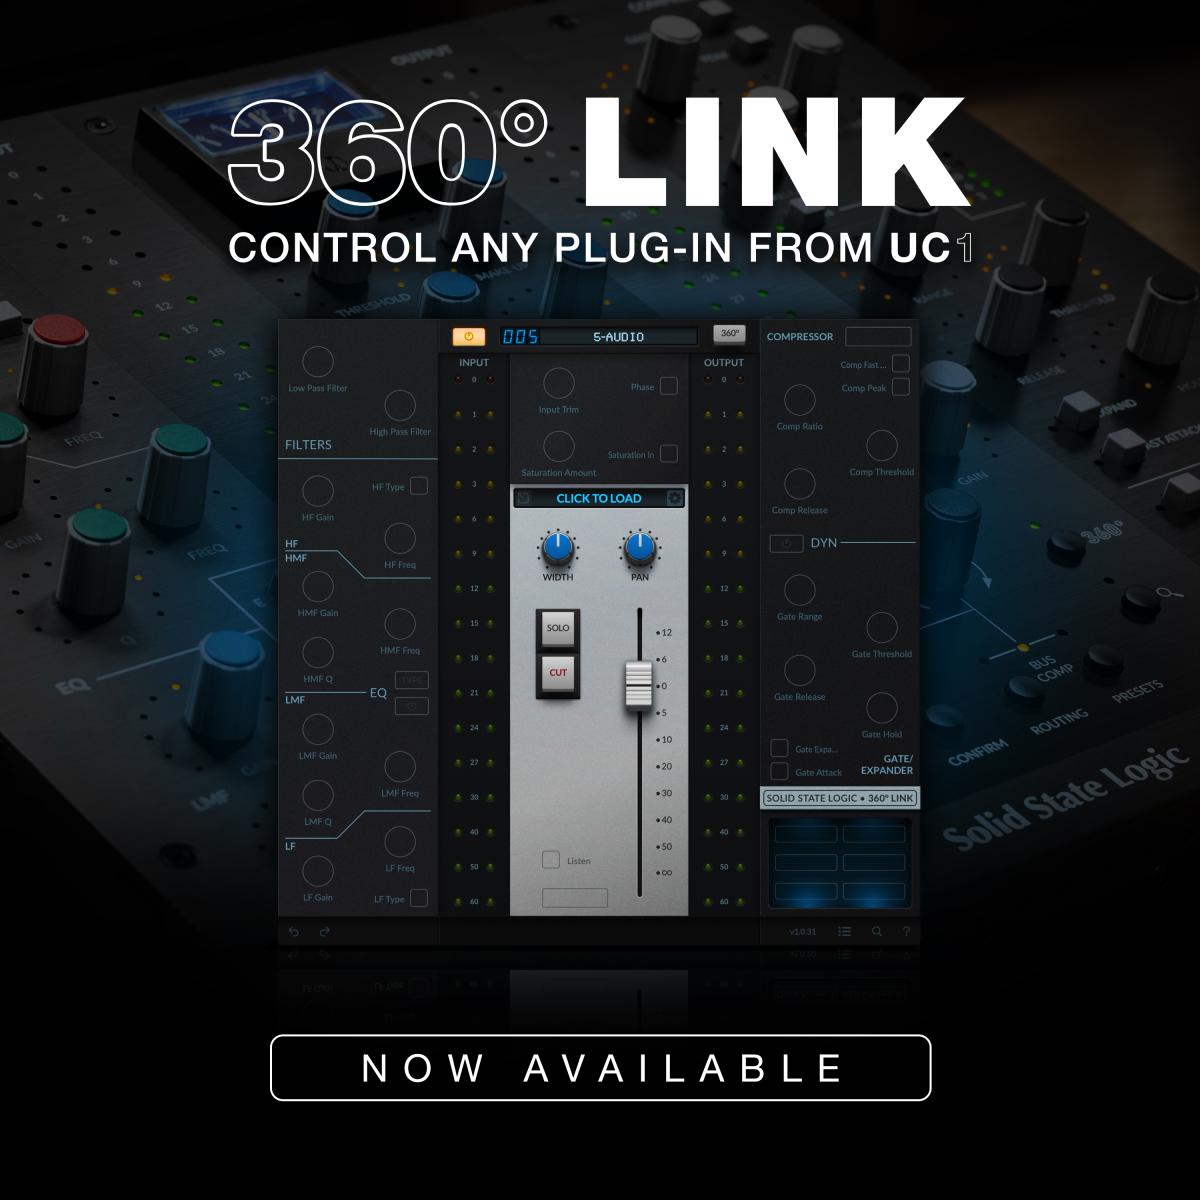 Any Plug-in, Any Flavour: You can now Control Any Plug-in with SSL’s UC1 and 360° Link